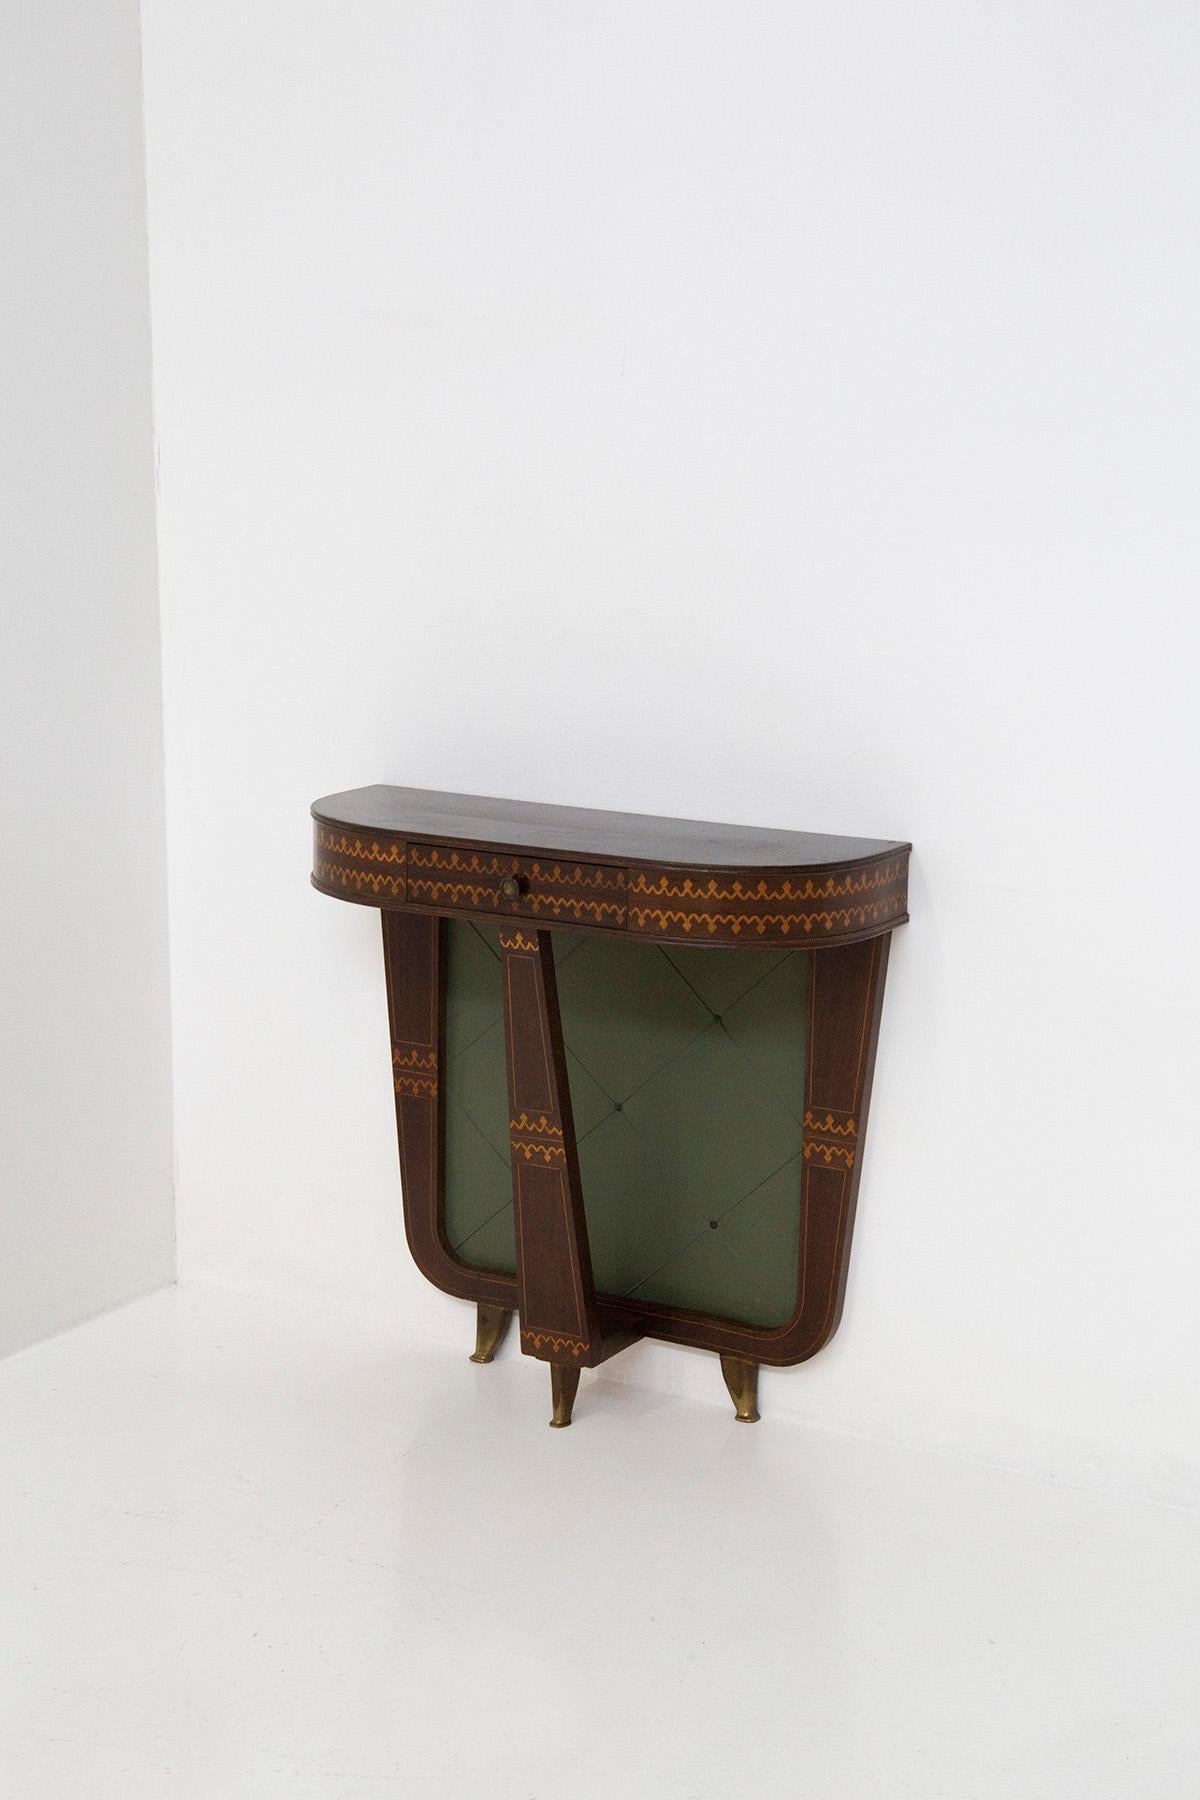 Rare and elegant Italian entrance console by Paolo Buffa from the 1950s. The console features a wooden frame with truly remarkable and fine inlays. The console features a countertop with beveled corners to create harmony with the entire structure.